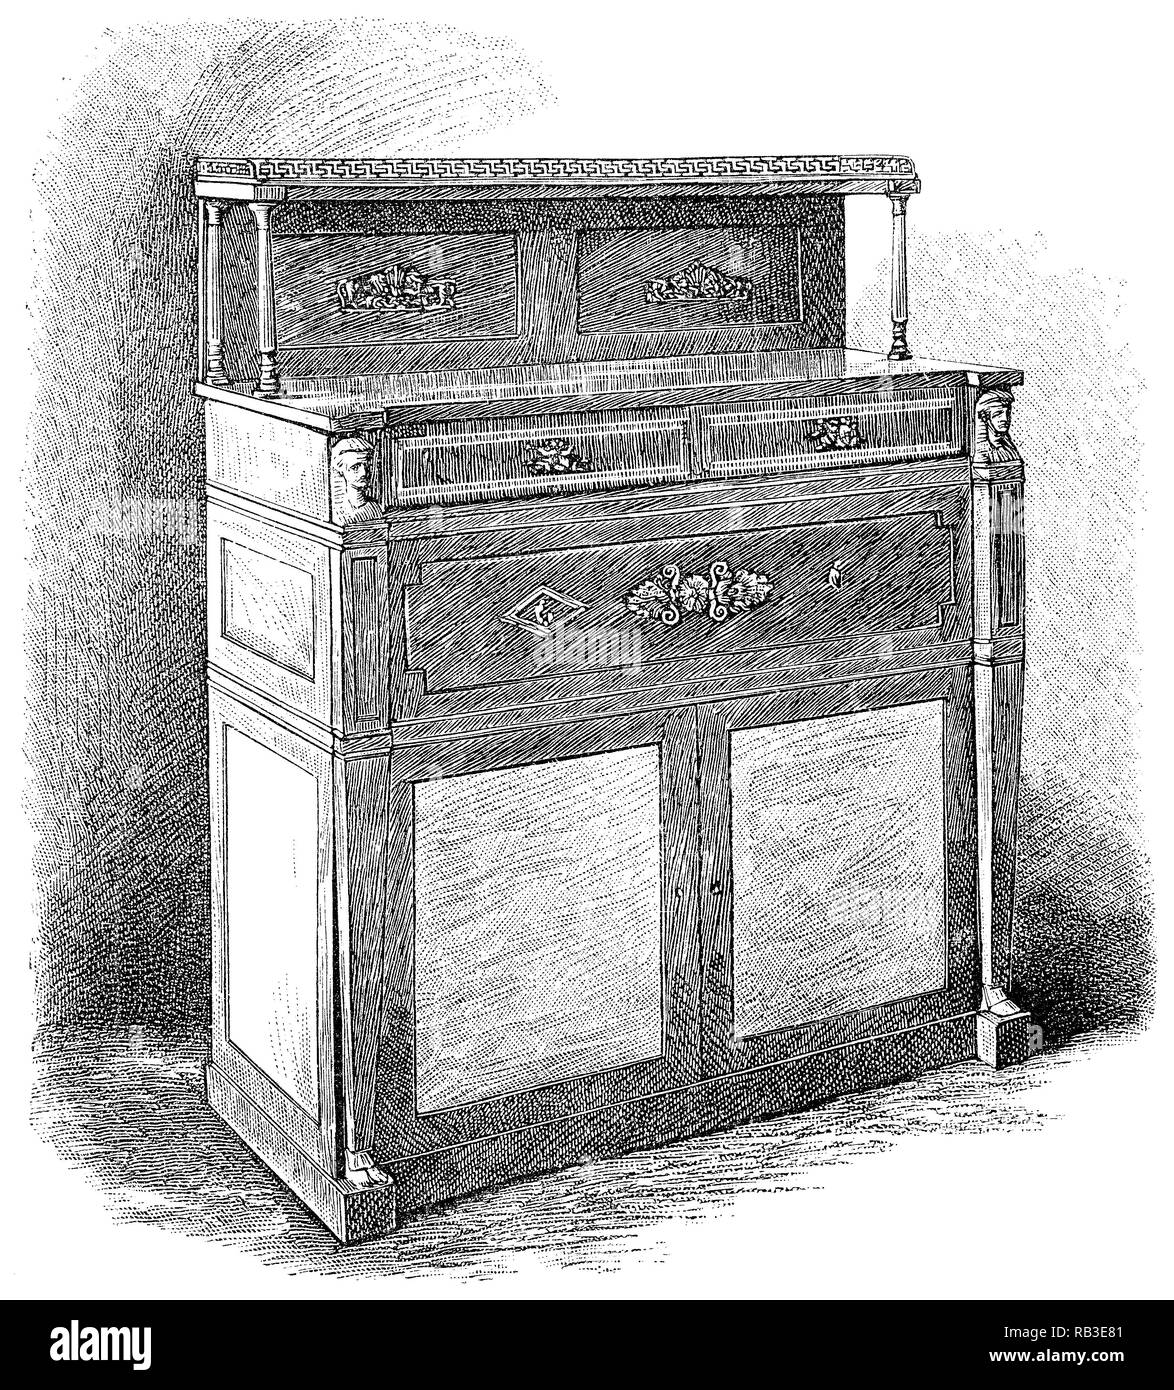 1884 engraving of an upright piano invented by John Isaac Hawkins in 1800. Stock Photo